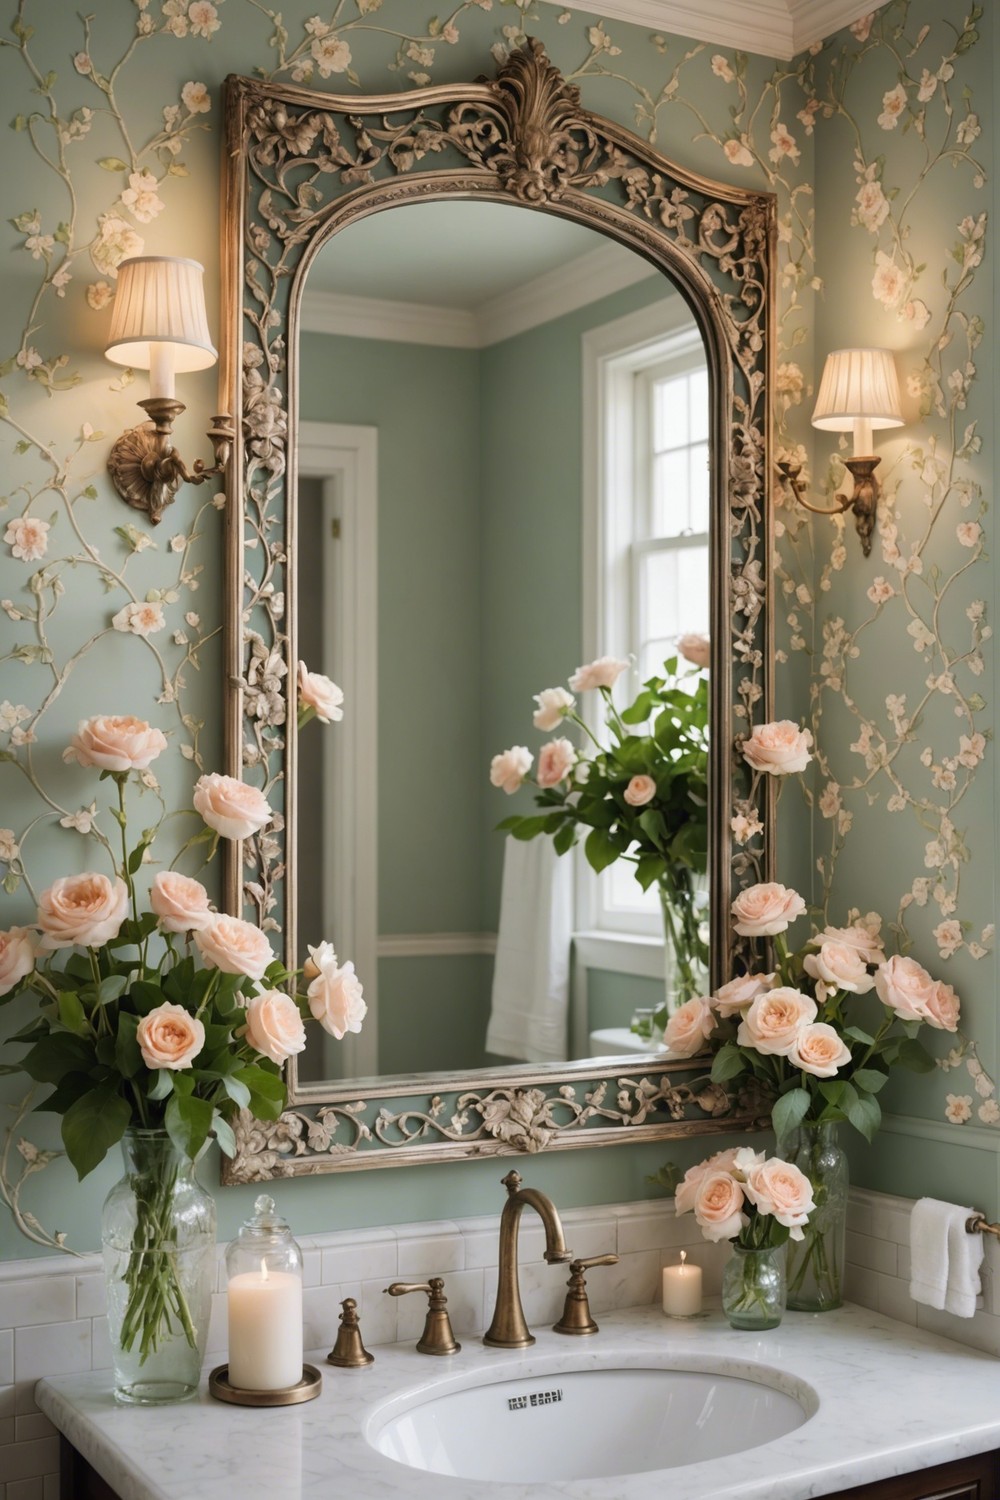 Floral Accented Mirrors for a Whimsical Feel